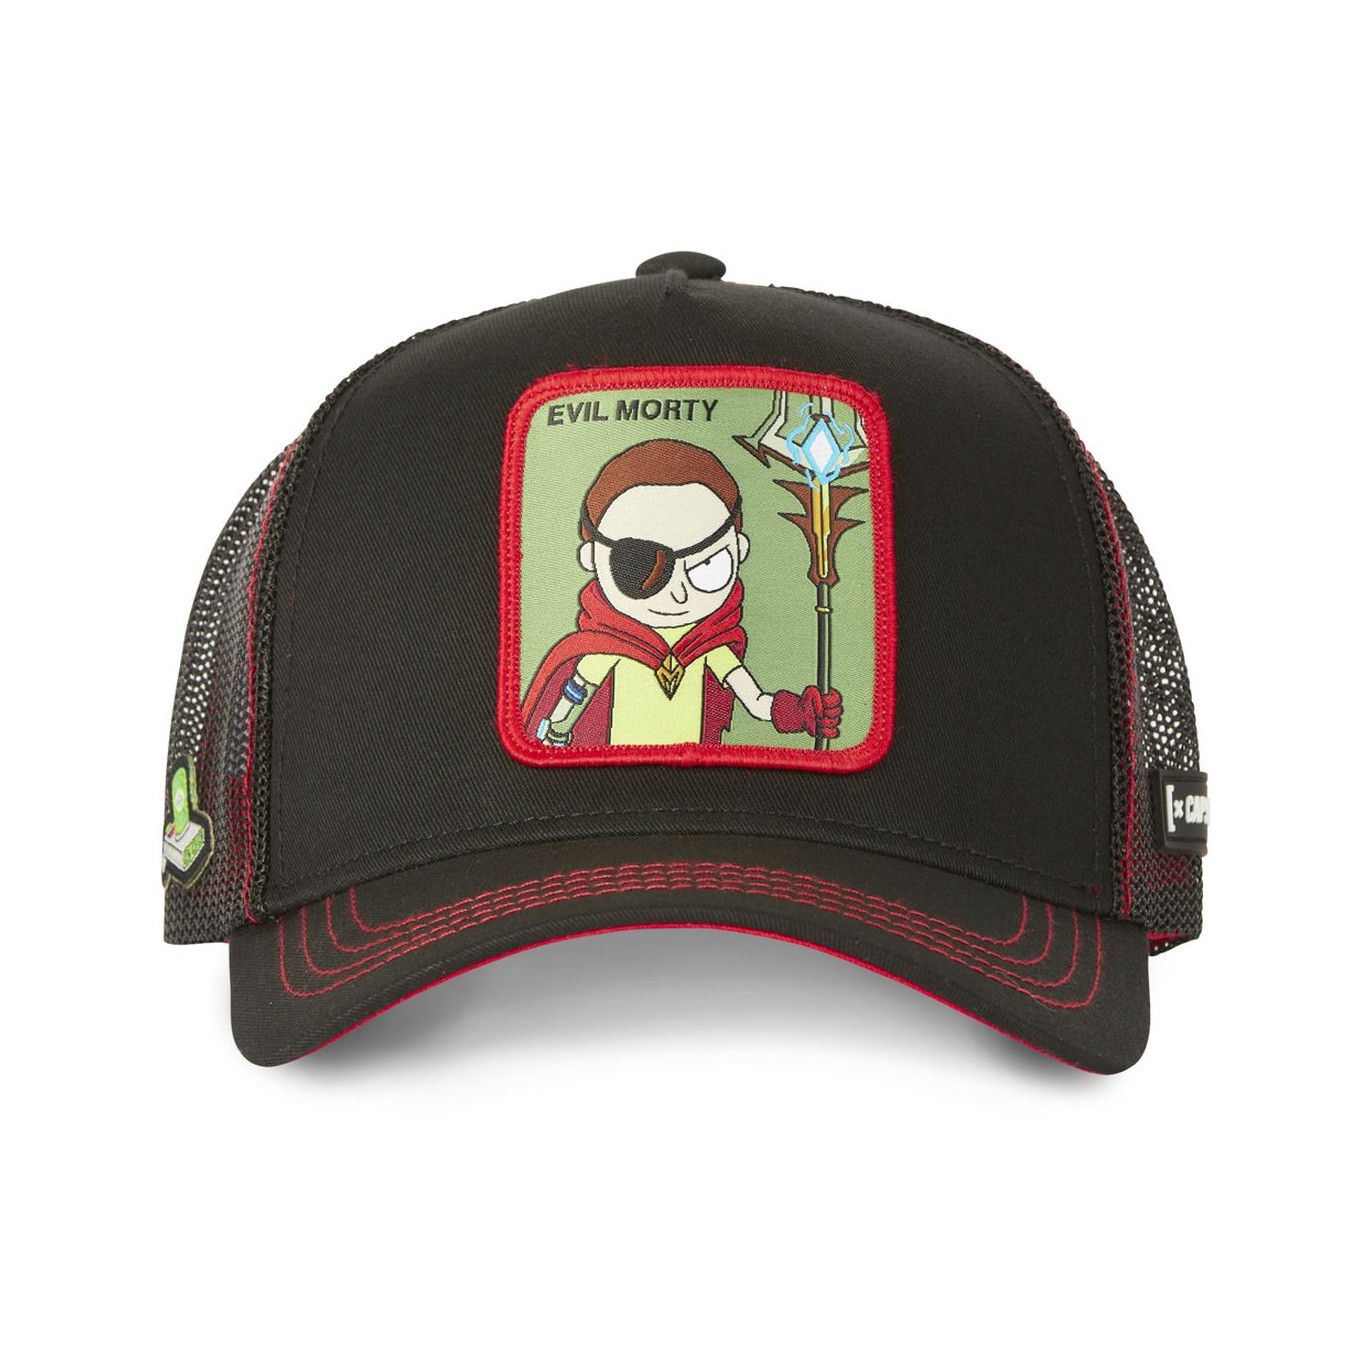 Casquette trucker avec filet Rick and Morty Morty Capslab - 2